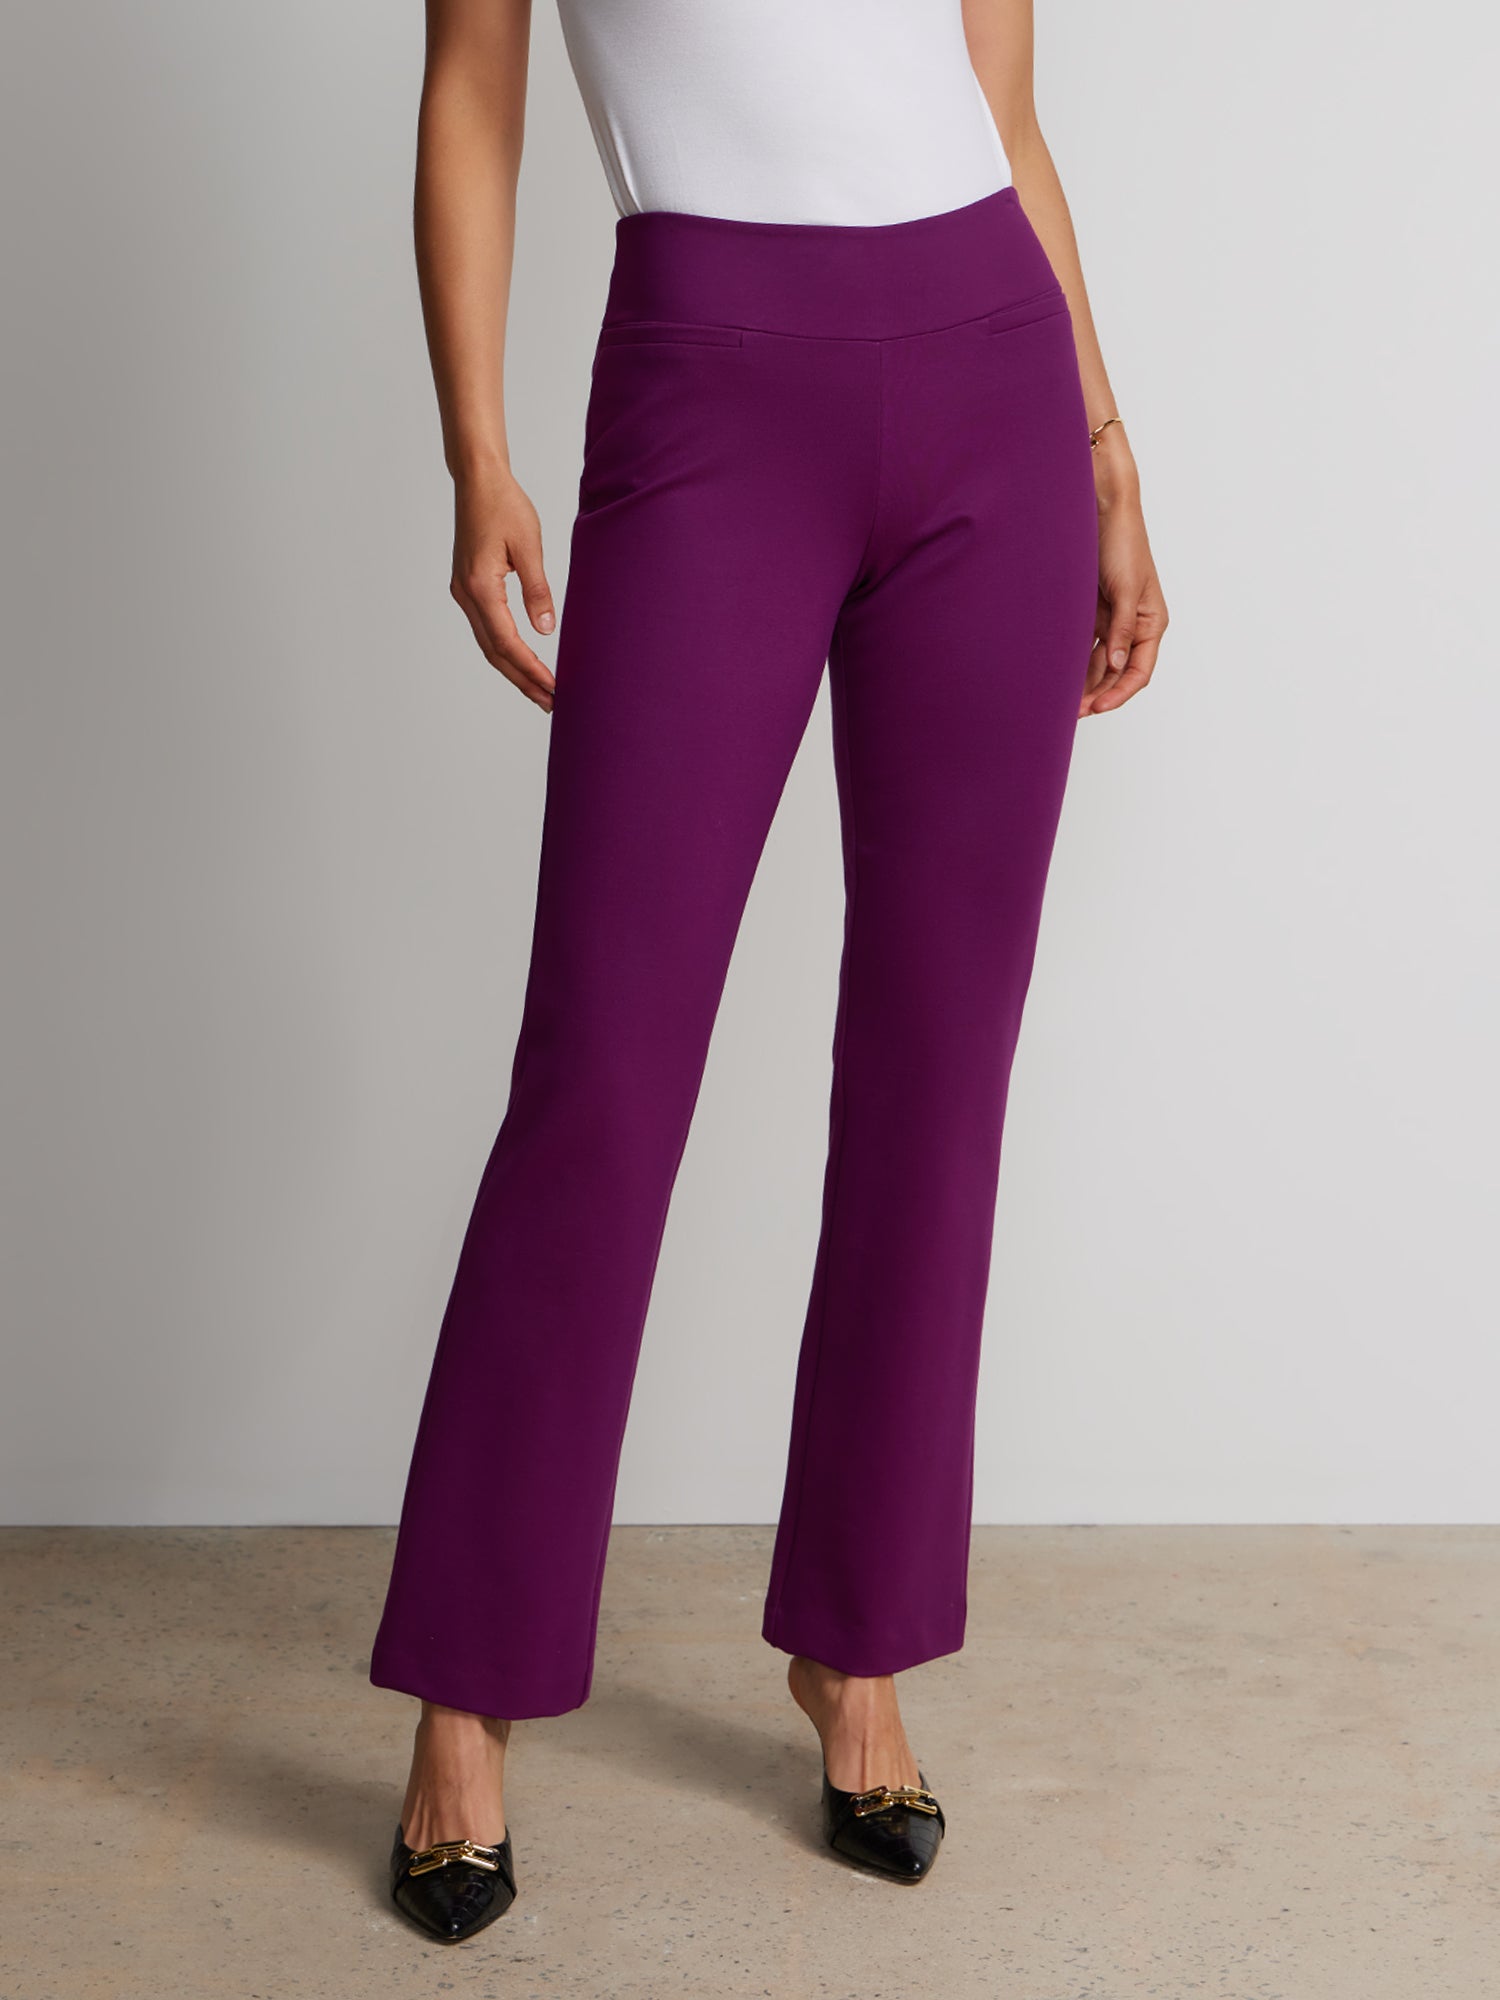 New York and Company Petite High-Waisted Bootcut Yoga Pant - ShopStyle